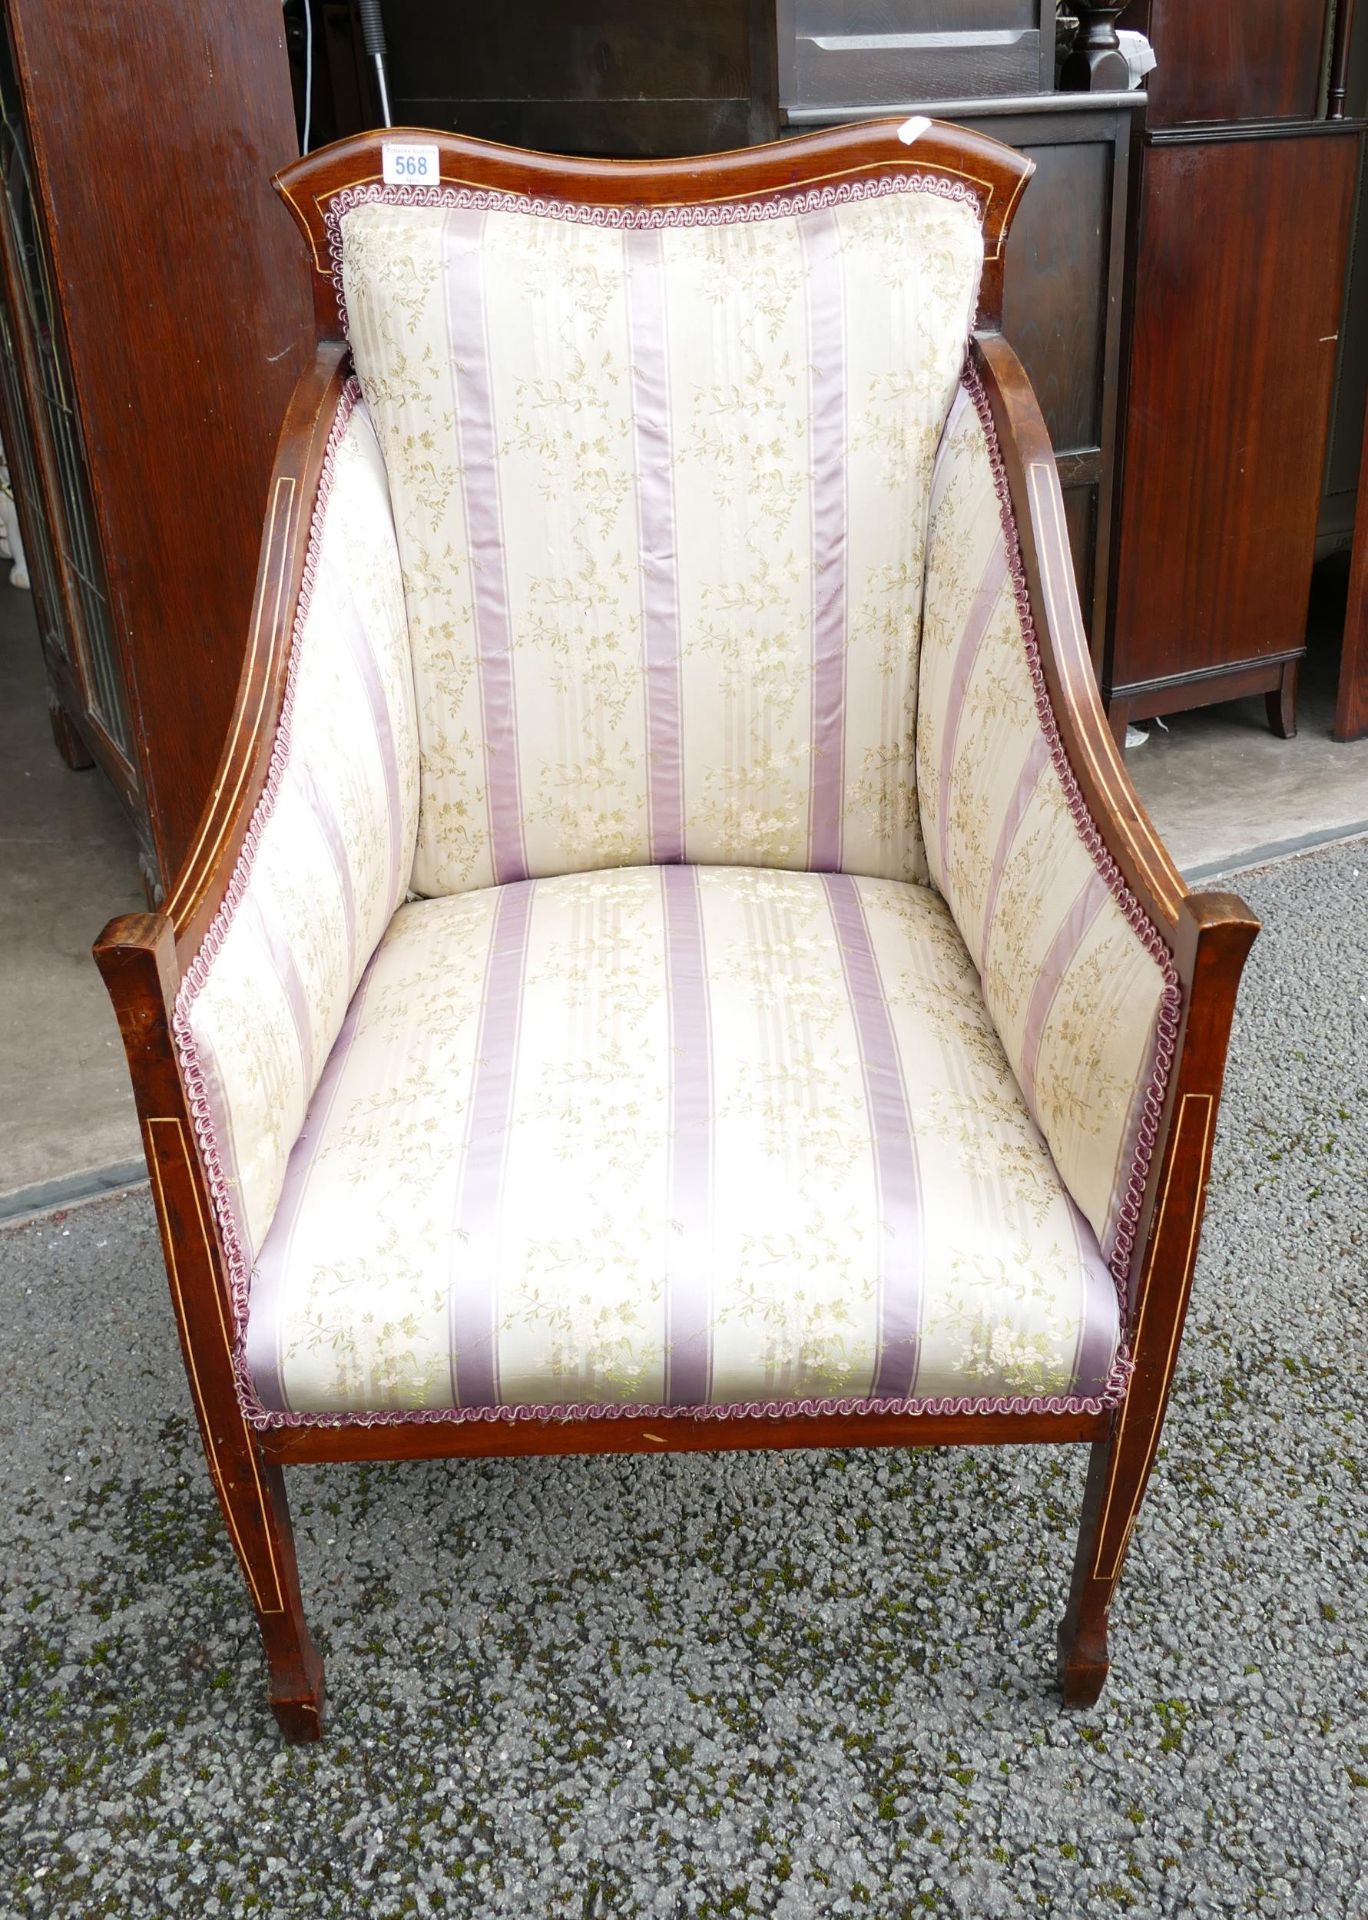 Antique Upholstered Bedroom Chair - Image 2 of 2